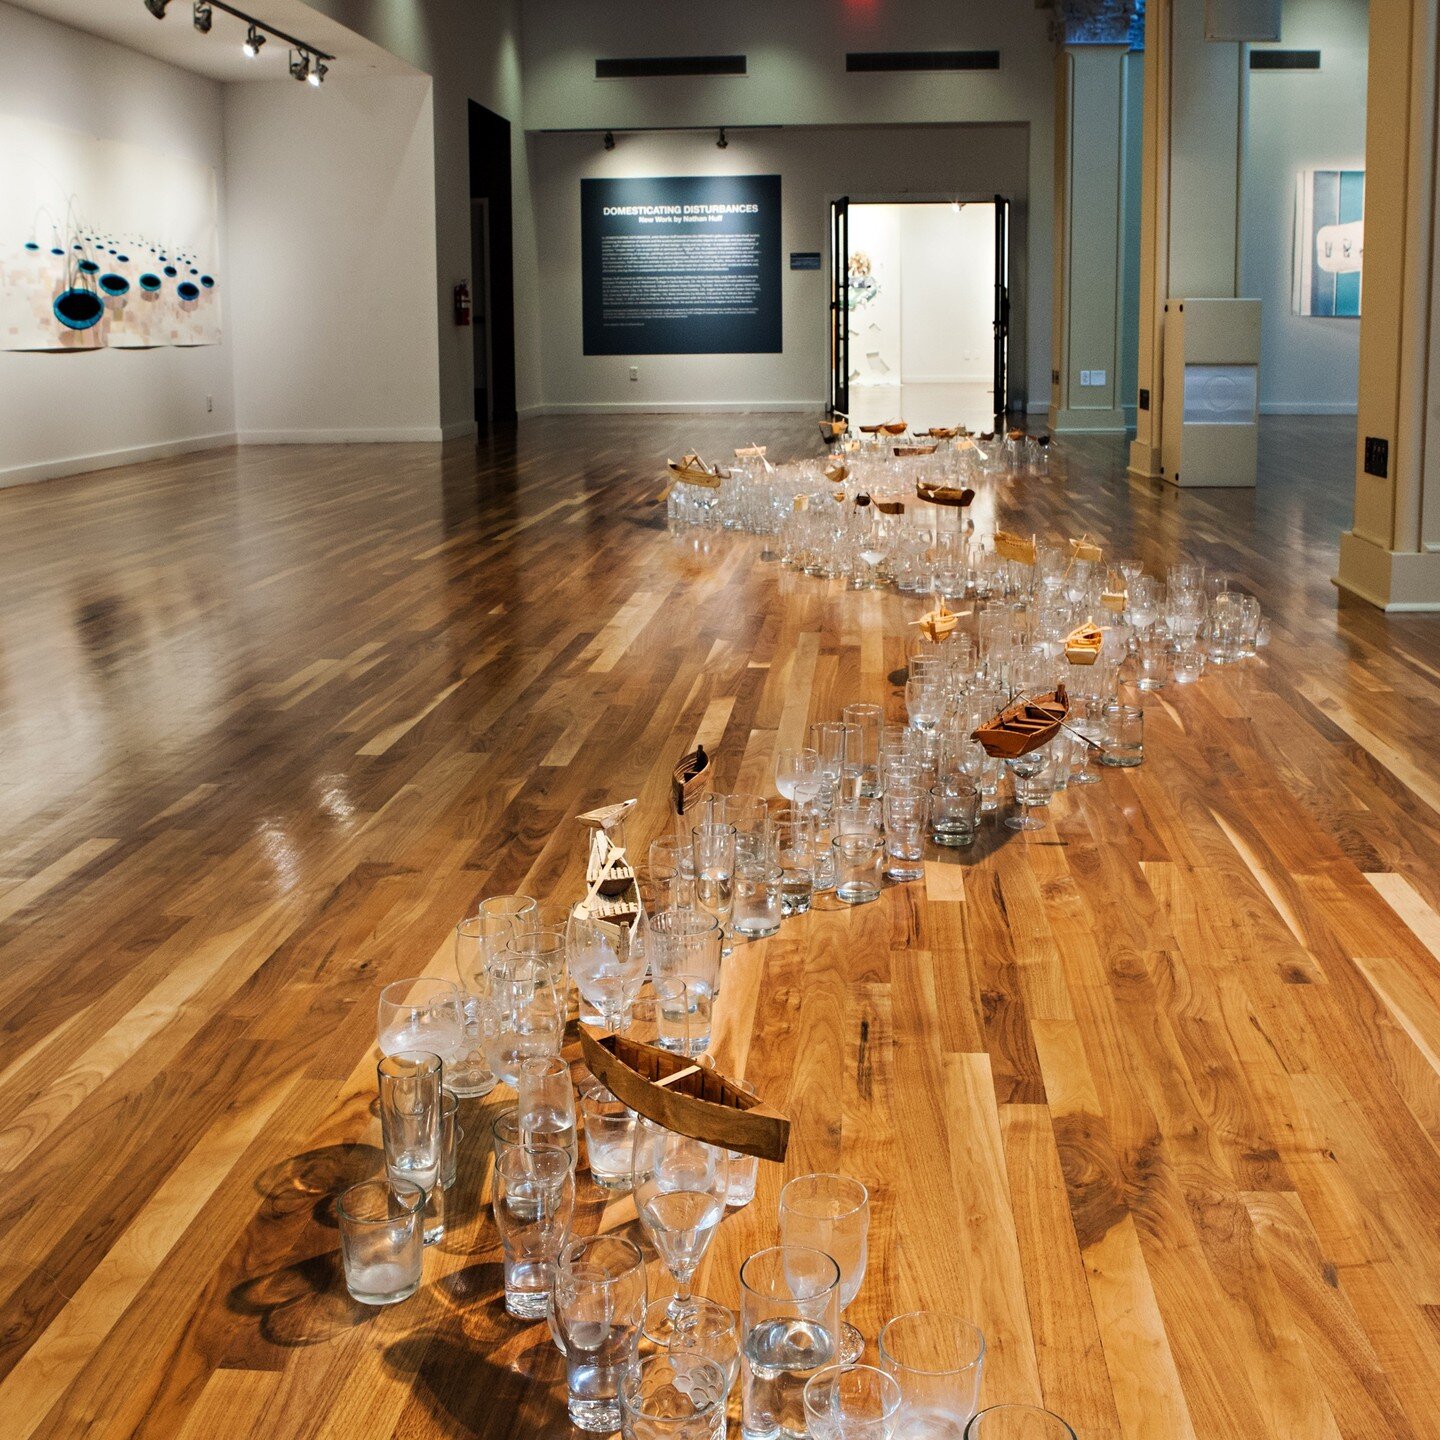 Throwback to this project from 10 years ago. &quot;Up a creek, down a river&quot; 2013. (500 water glasses and handmade boats)
This was part of my exhibition at the Sweeney gallery and Culver Museum in Riverside. Special gratitude to the wonderful cu